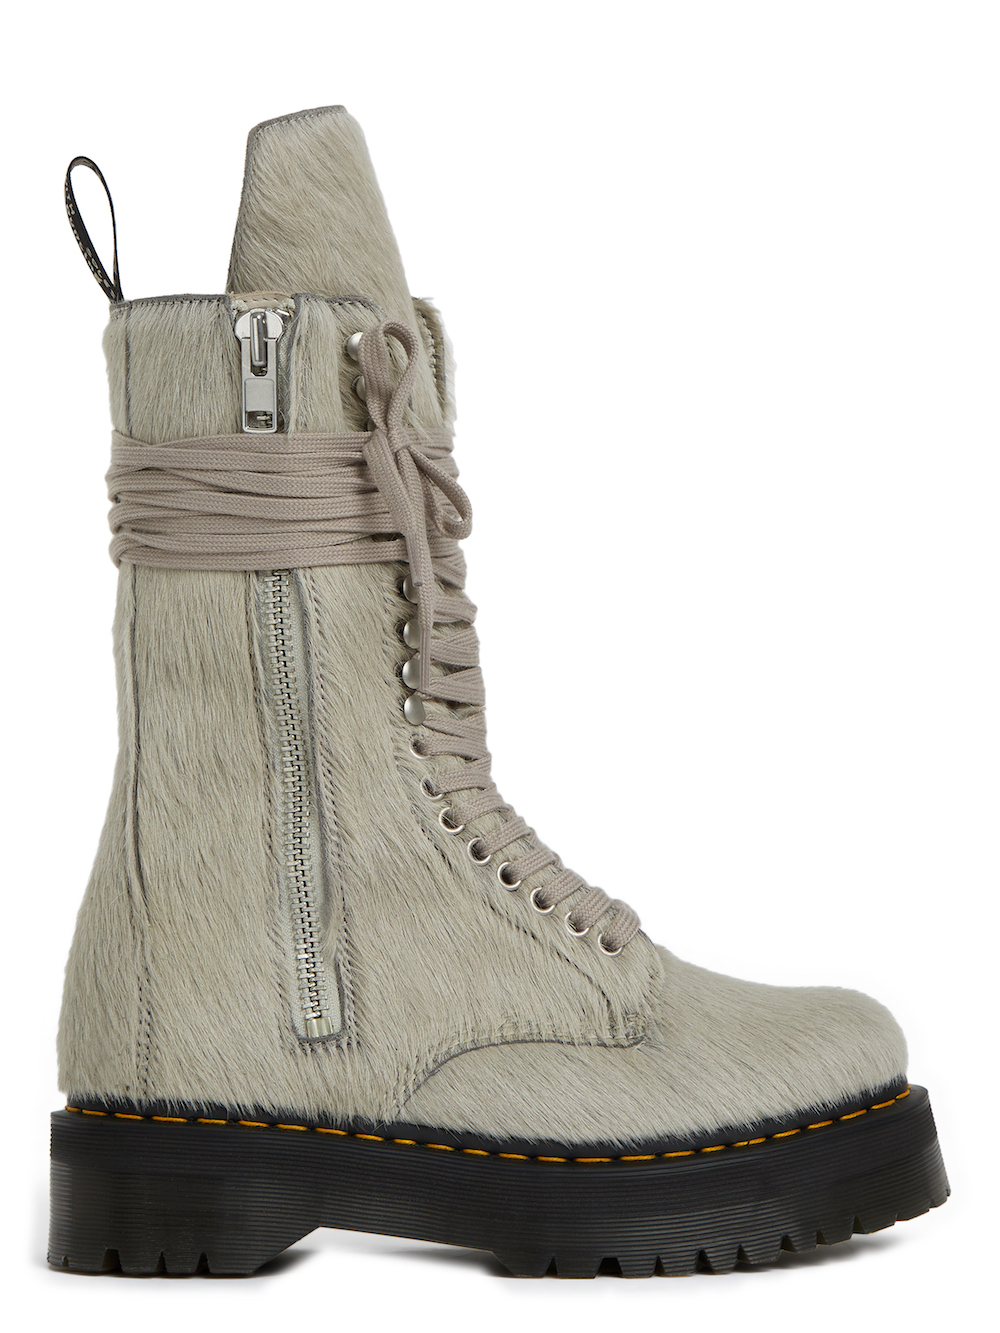 Rick Owens x Dr.Martens Complex Best Style Releases